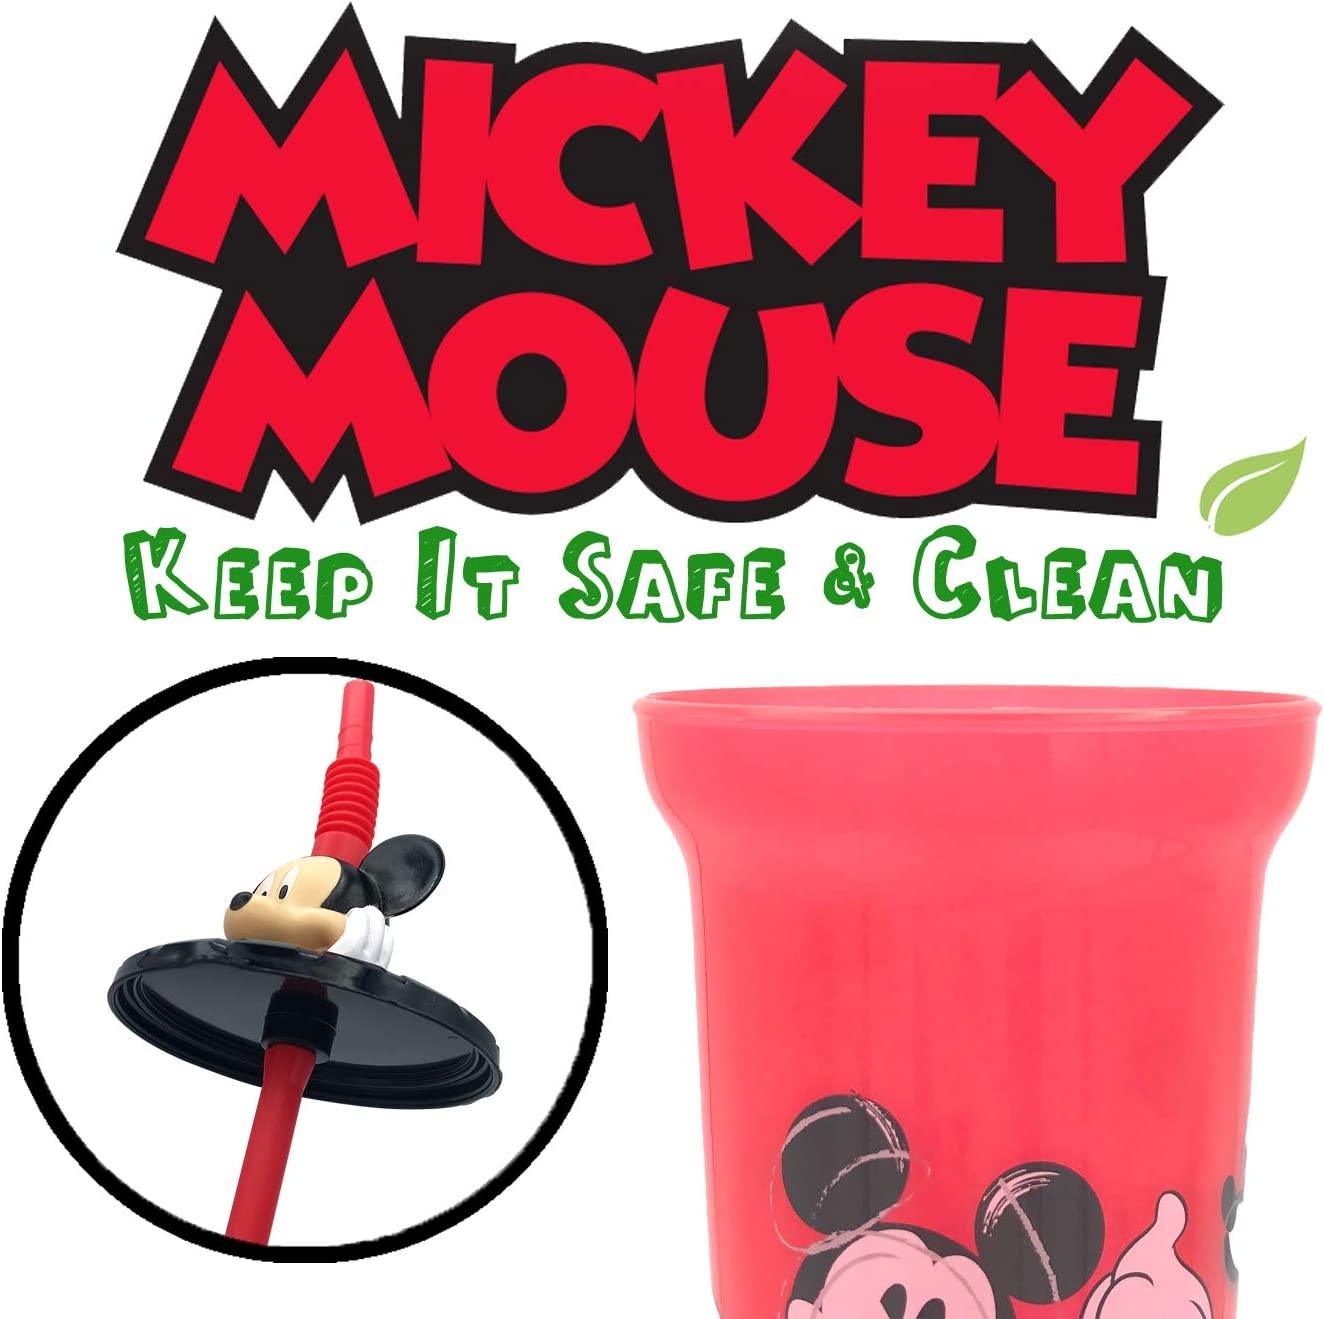 [3-Pack] Disney Mickey Mouse 15oz Buddy Sip Tumbler Cup with Lid & Straw, BPA-Free